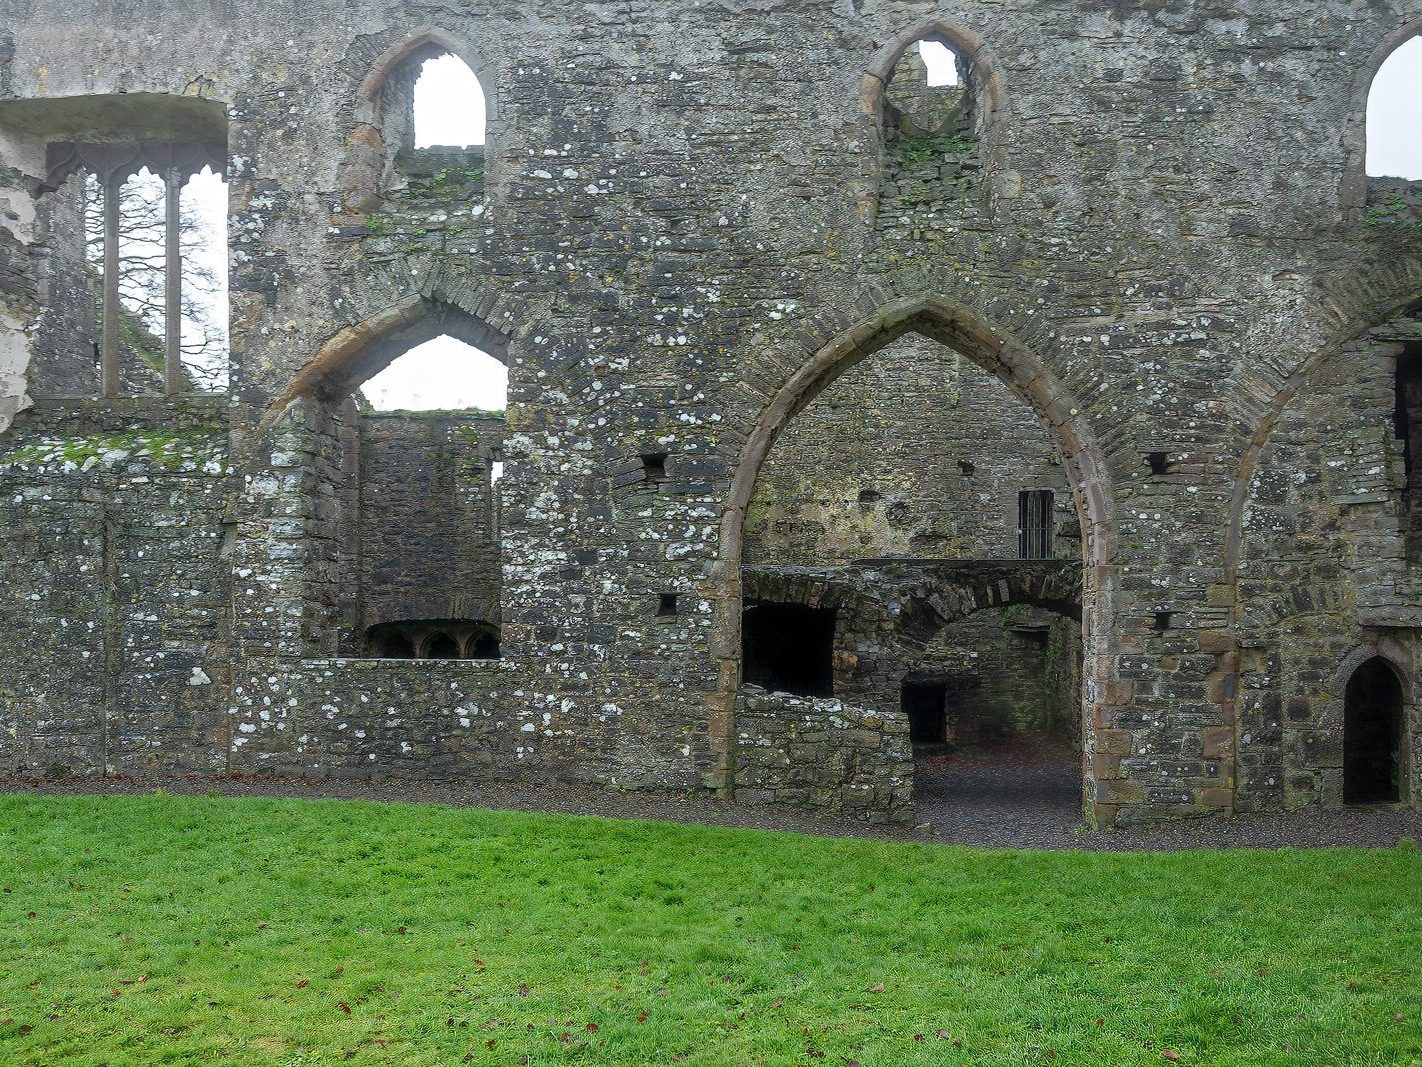 BECTIVE ABBEY WHICH I VISITED LAST CHRISTMAS [THERE WERE NO OTHER VISITORS AS IT WAS A VERY WET DAY]--225244-1